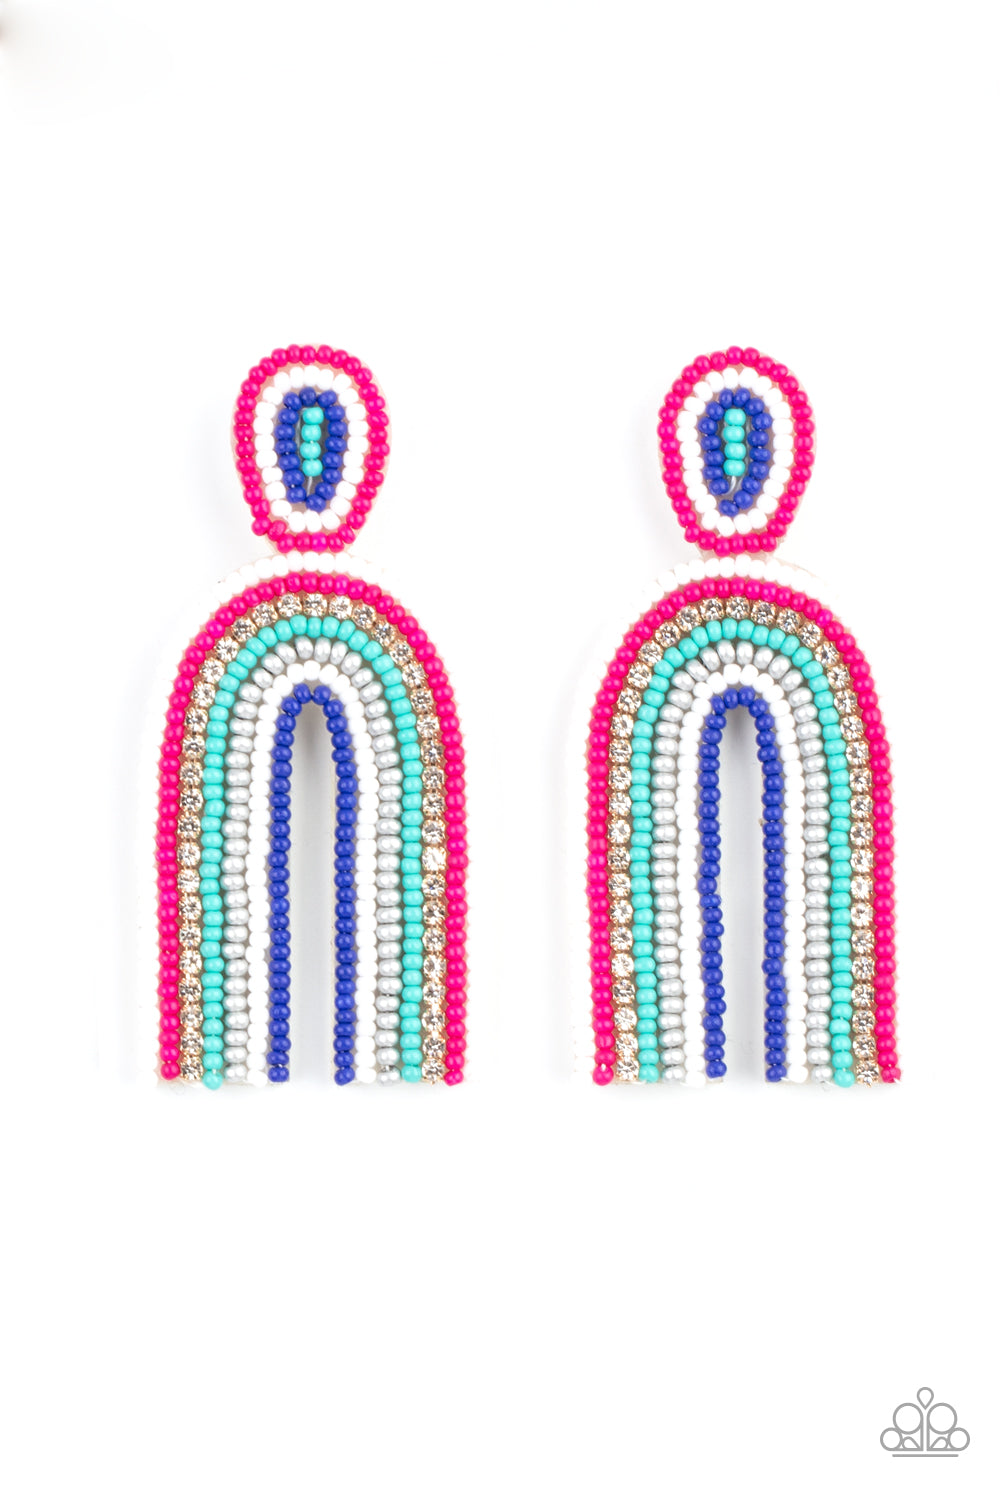 Rainbow Remedy Multi Seed Bead Earring - Paparazzi Accessories  Infused with a single row of glassy white rhinestones, dainty strands of white, pink, turquoise, silver, and blue seed beads stack into a colorful rainbow at the bottom of a matching seed beaded fitting. Earring attaches to a standard post fitting.  Sold as one pair of post earrings.